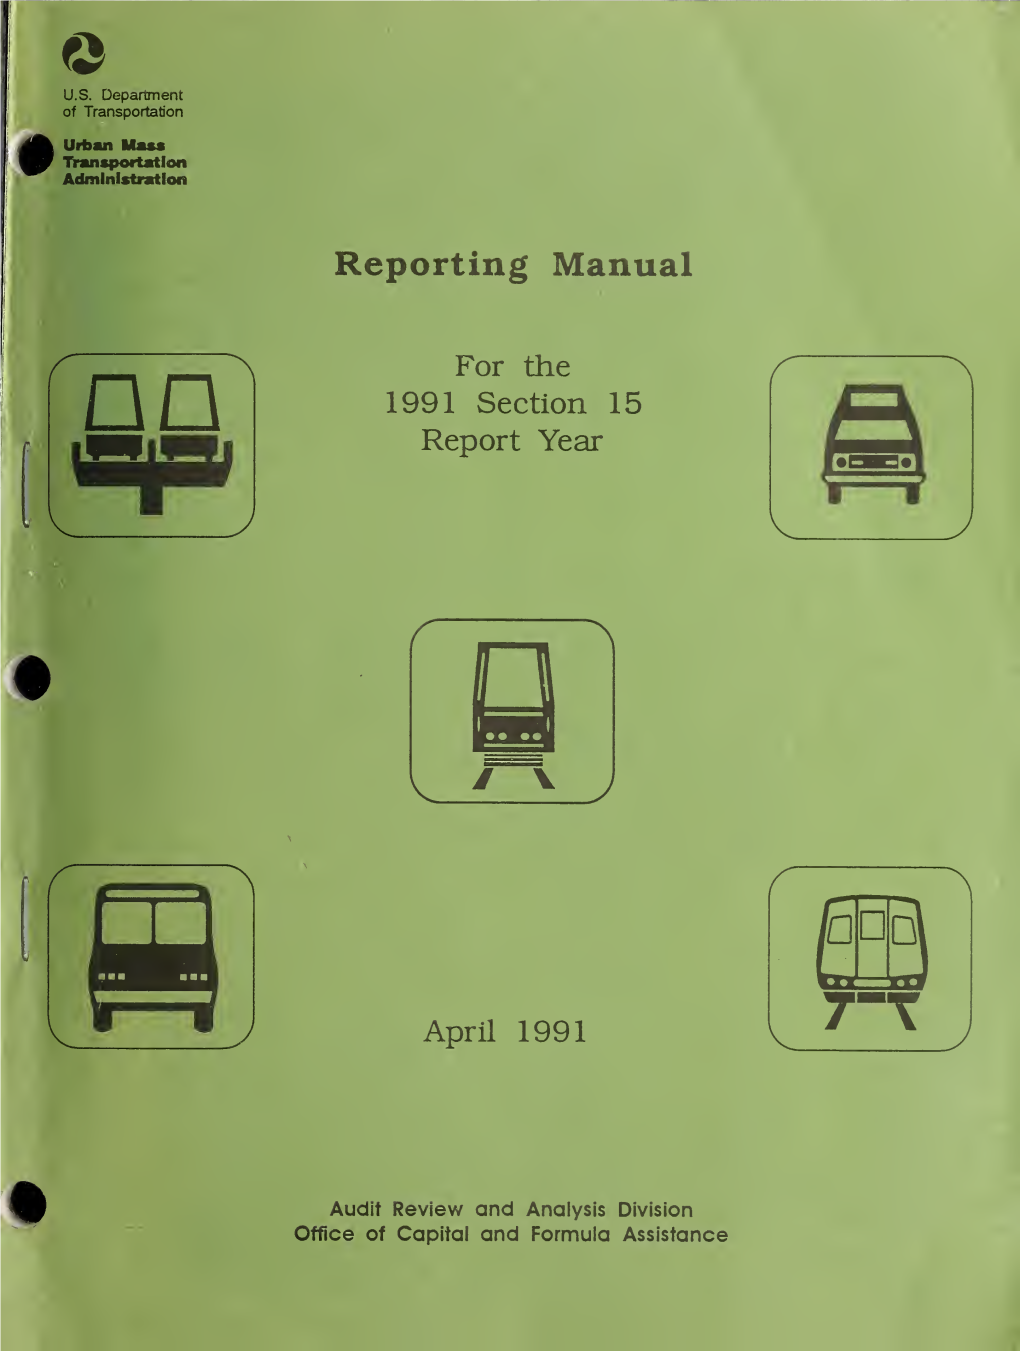 For the 1991 Section 15 Report Year